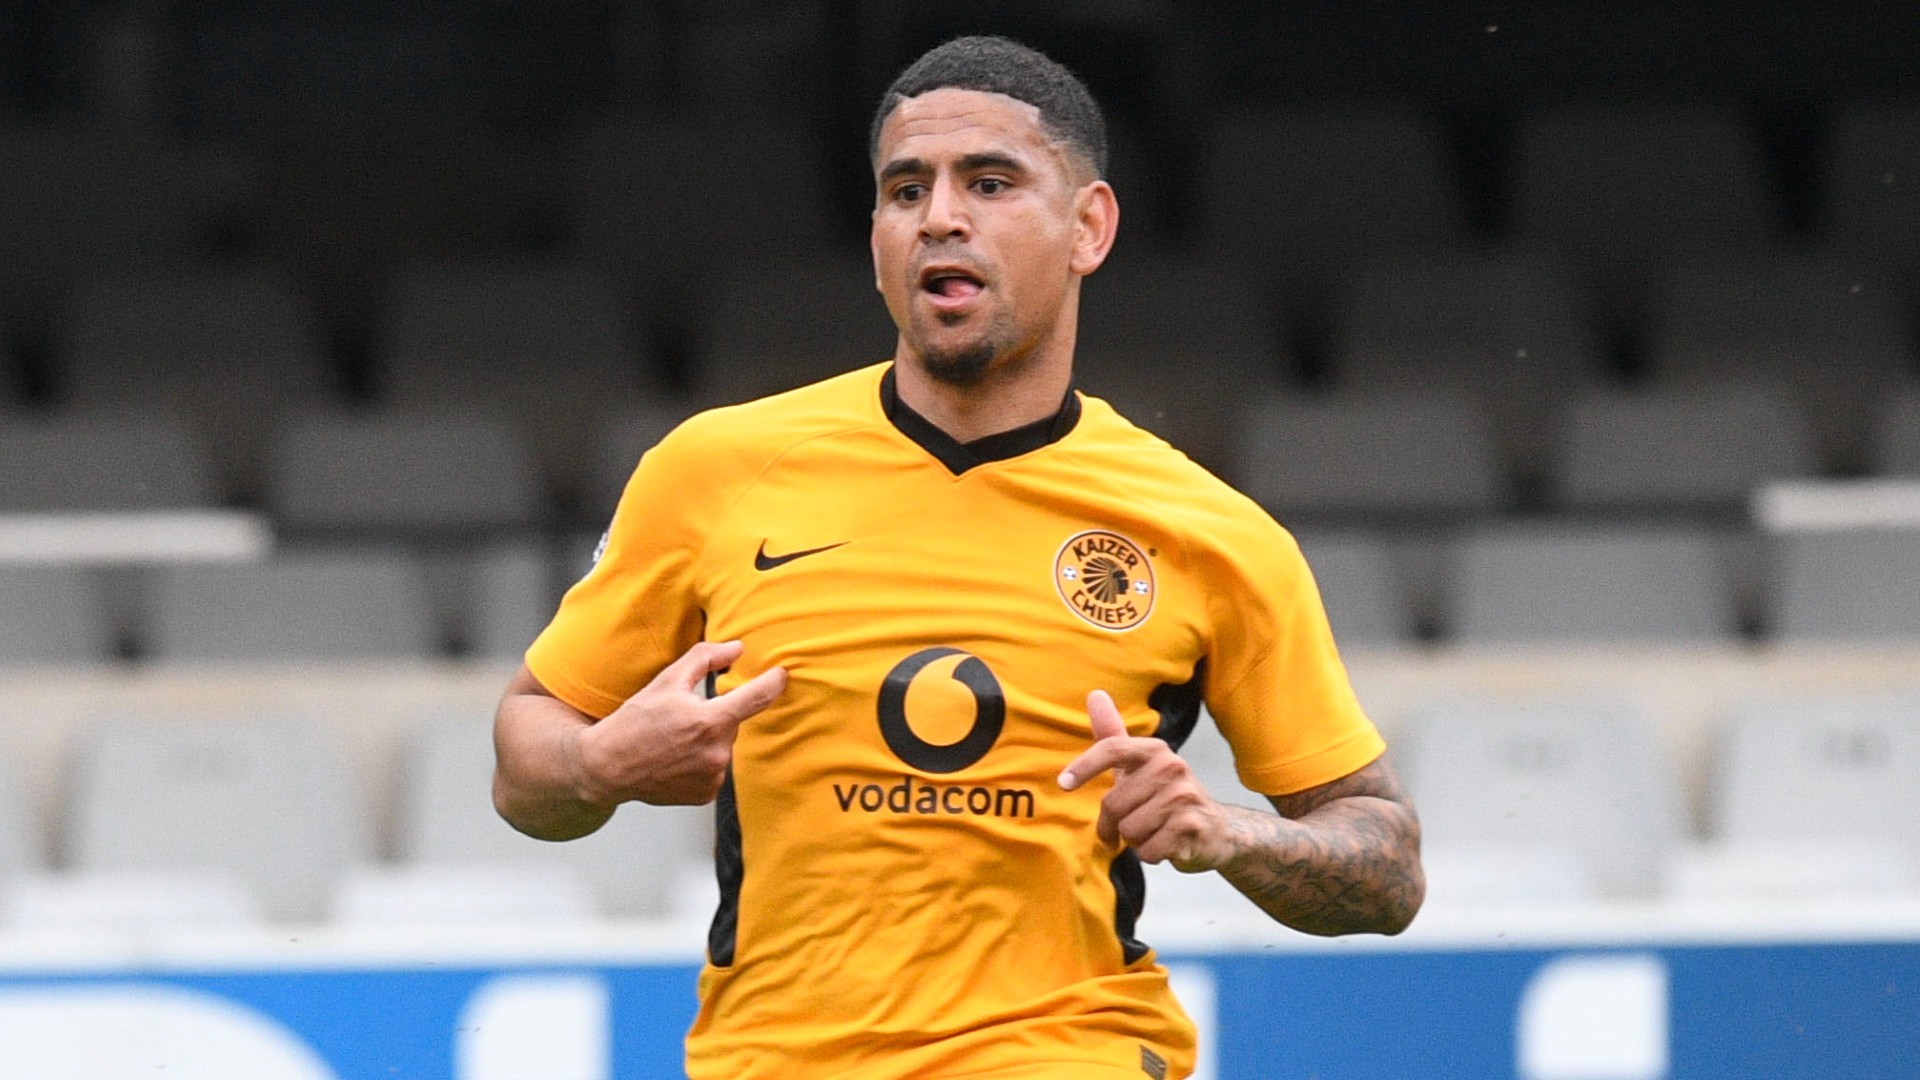 Kaizer Chiefs player ratings after Chippa United win: Dolly scintillating, Akpeyi’s safe hands